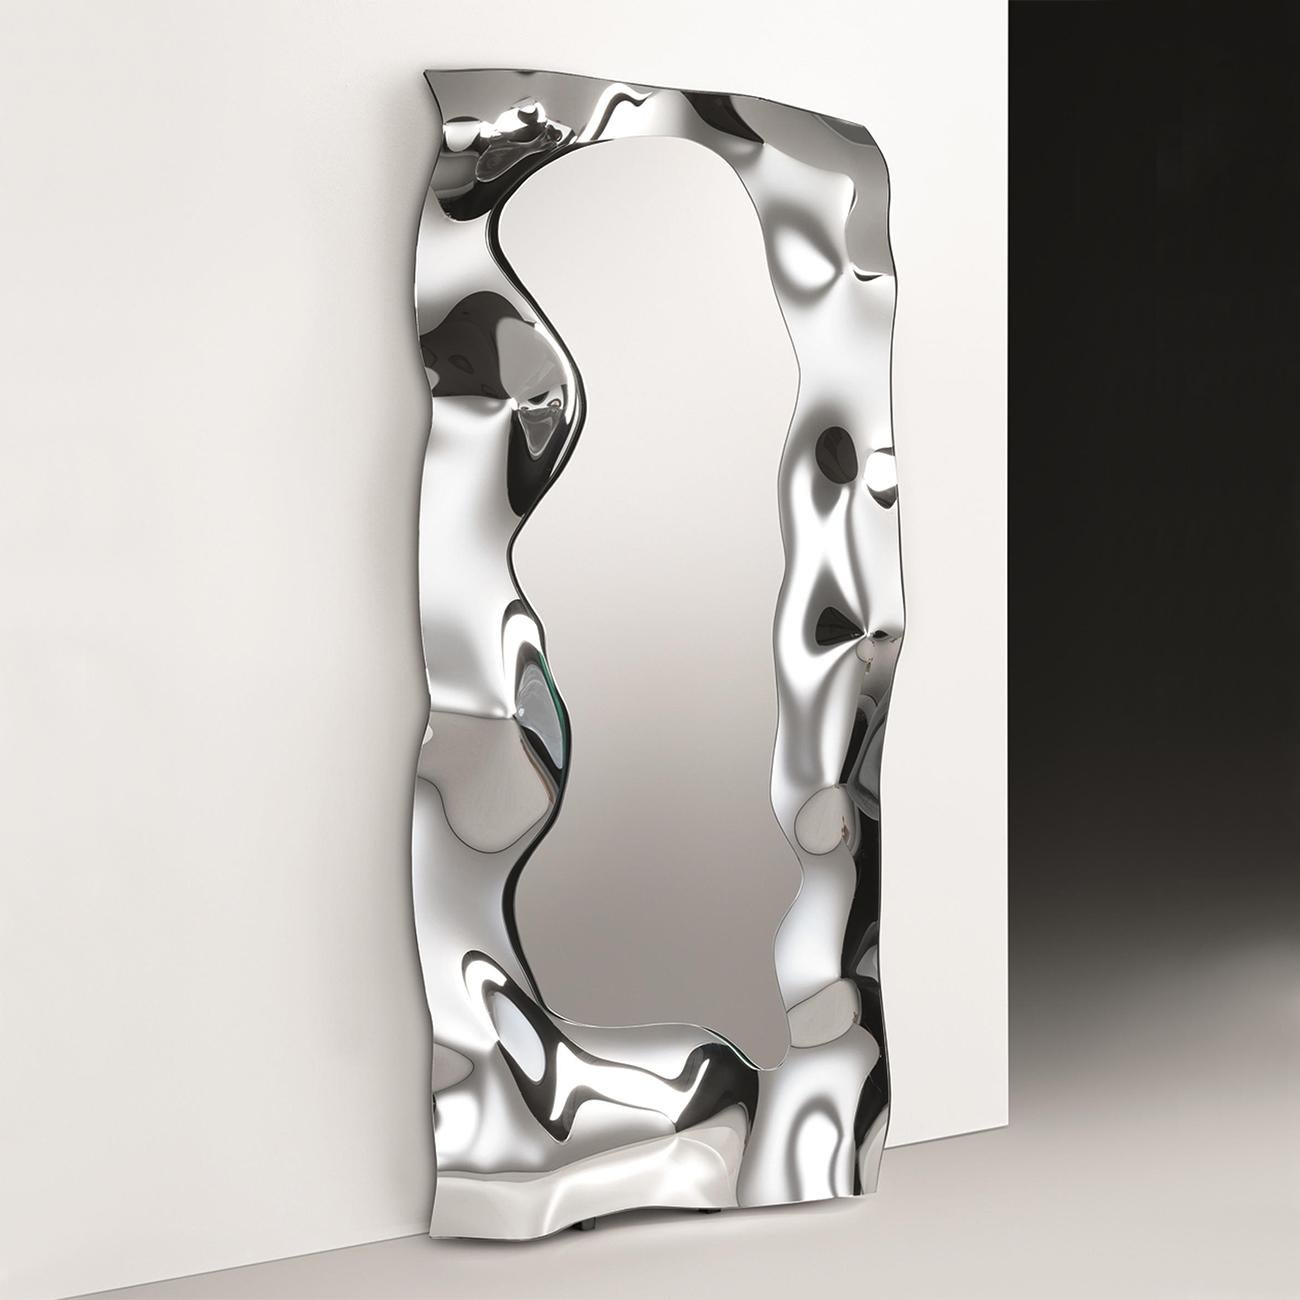 Mirror slinking full in high temperature fused mirror glass,
6mm thickness. With polished metal frame. Mirror back in
silver finish.